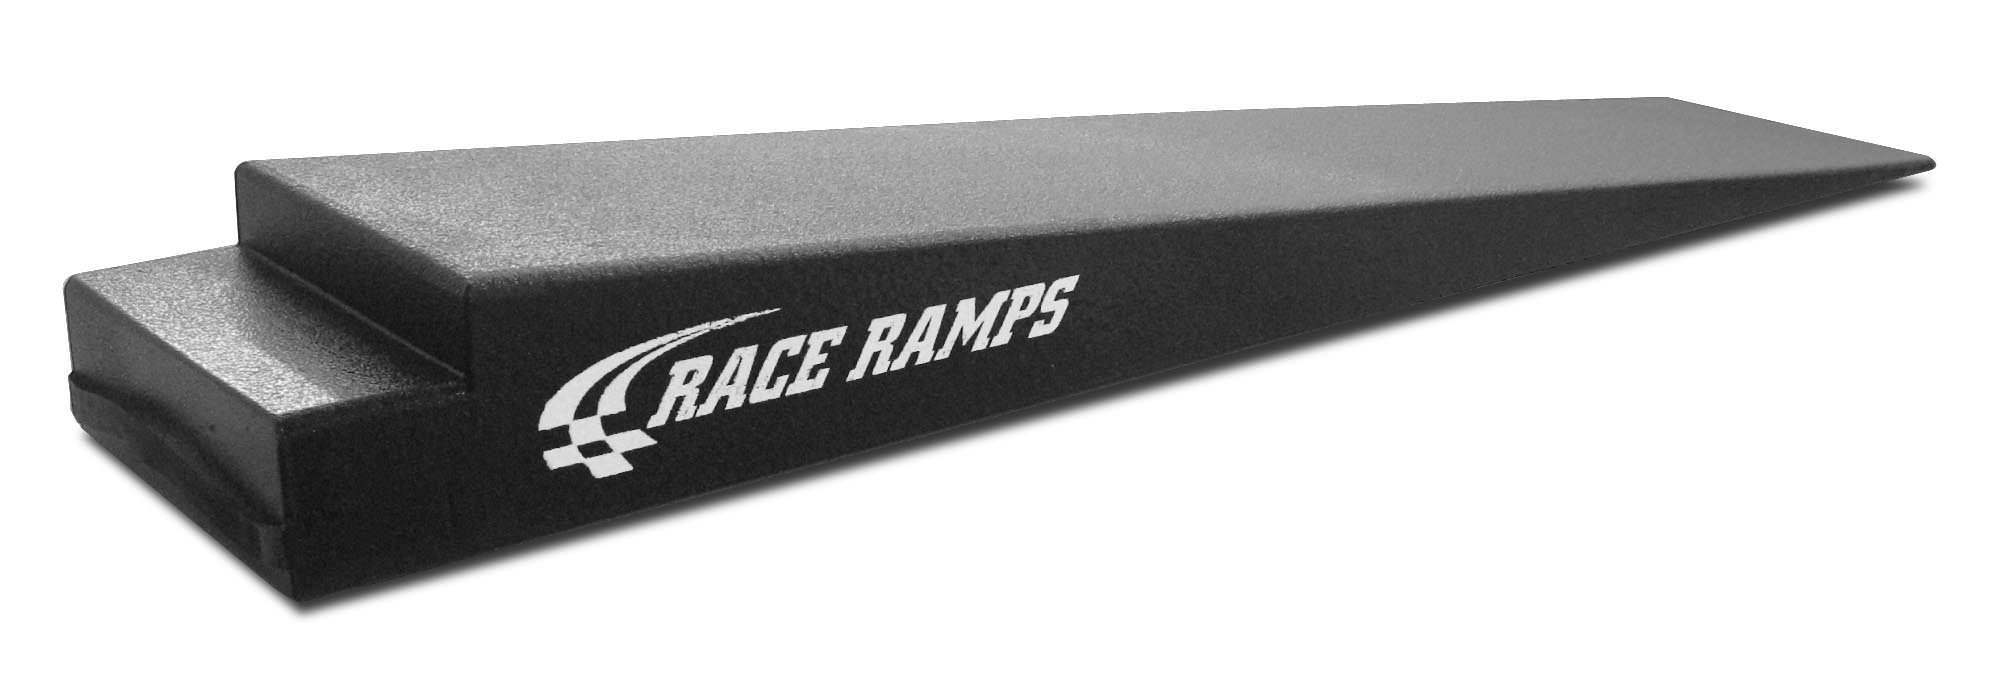 Race Ramps RR-TR-7 Trailer Ramp, 7 in Lift Height, 74 in Long, 14 in Wide, 5 in Trailer Lip, 5.5 Degree Incline, 1500 lb Capacity, Pair